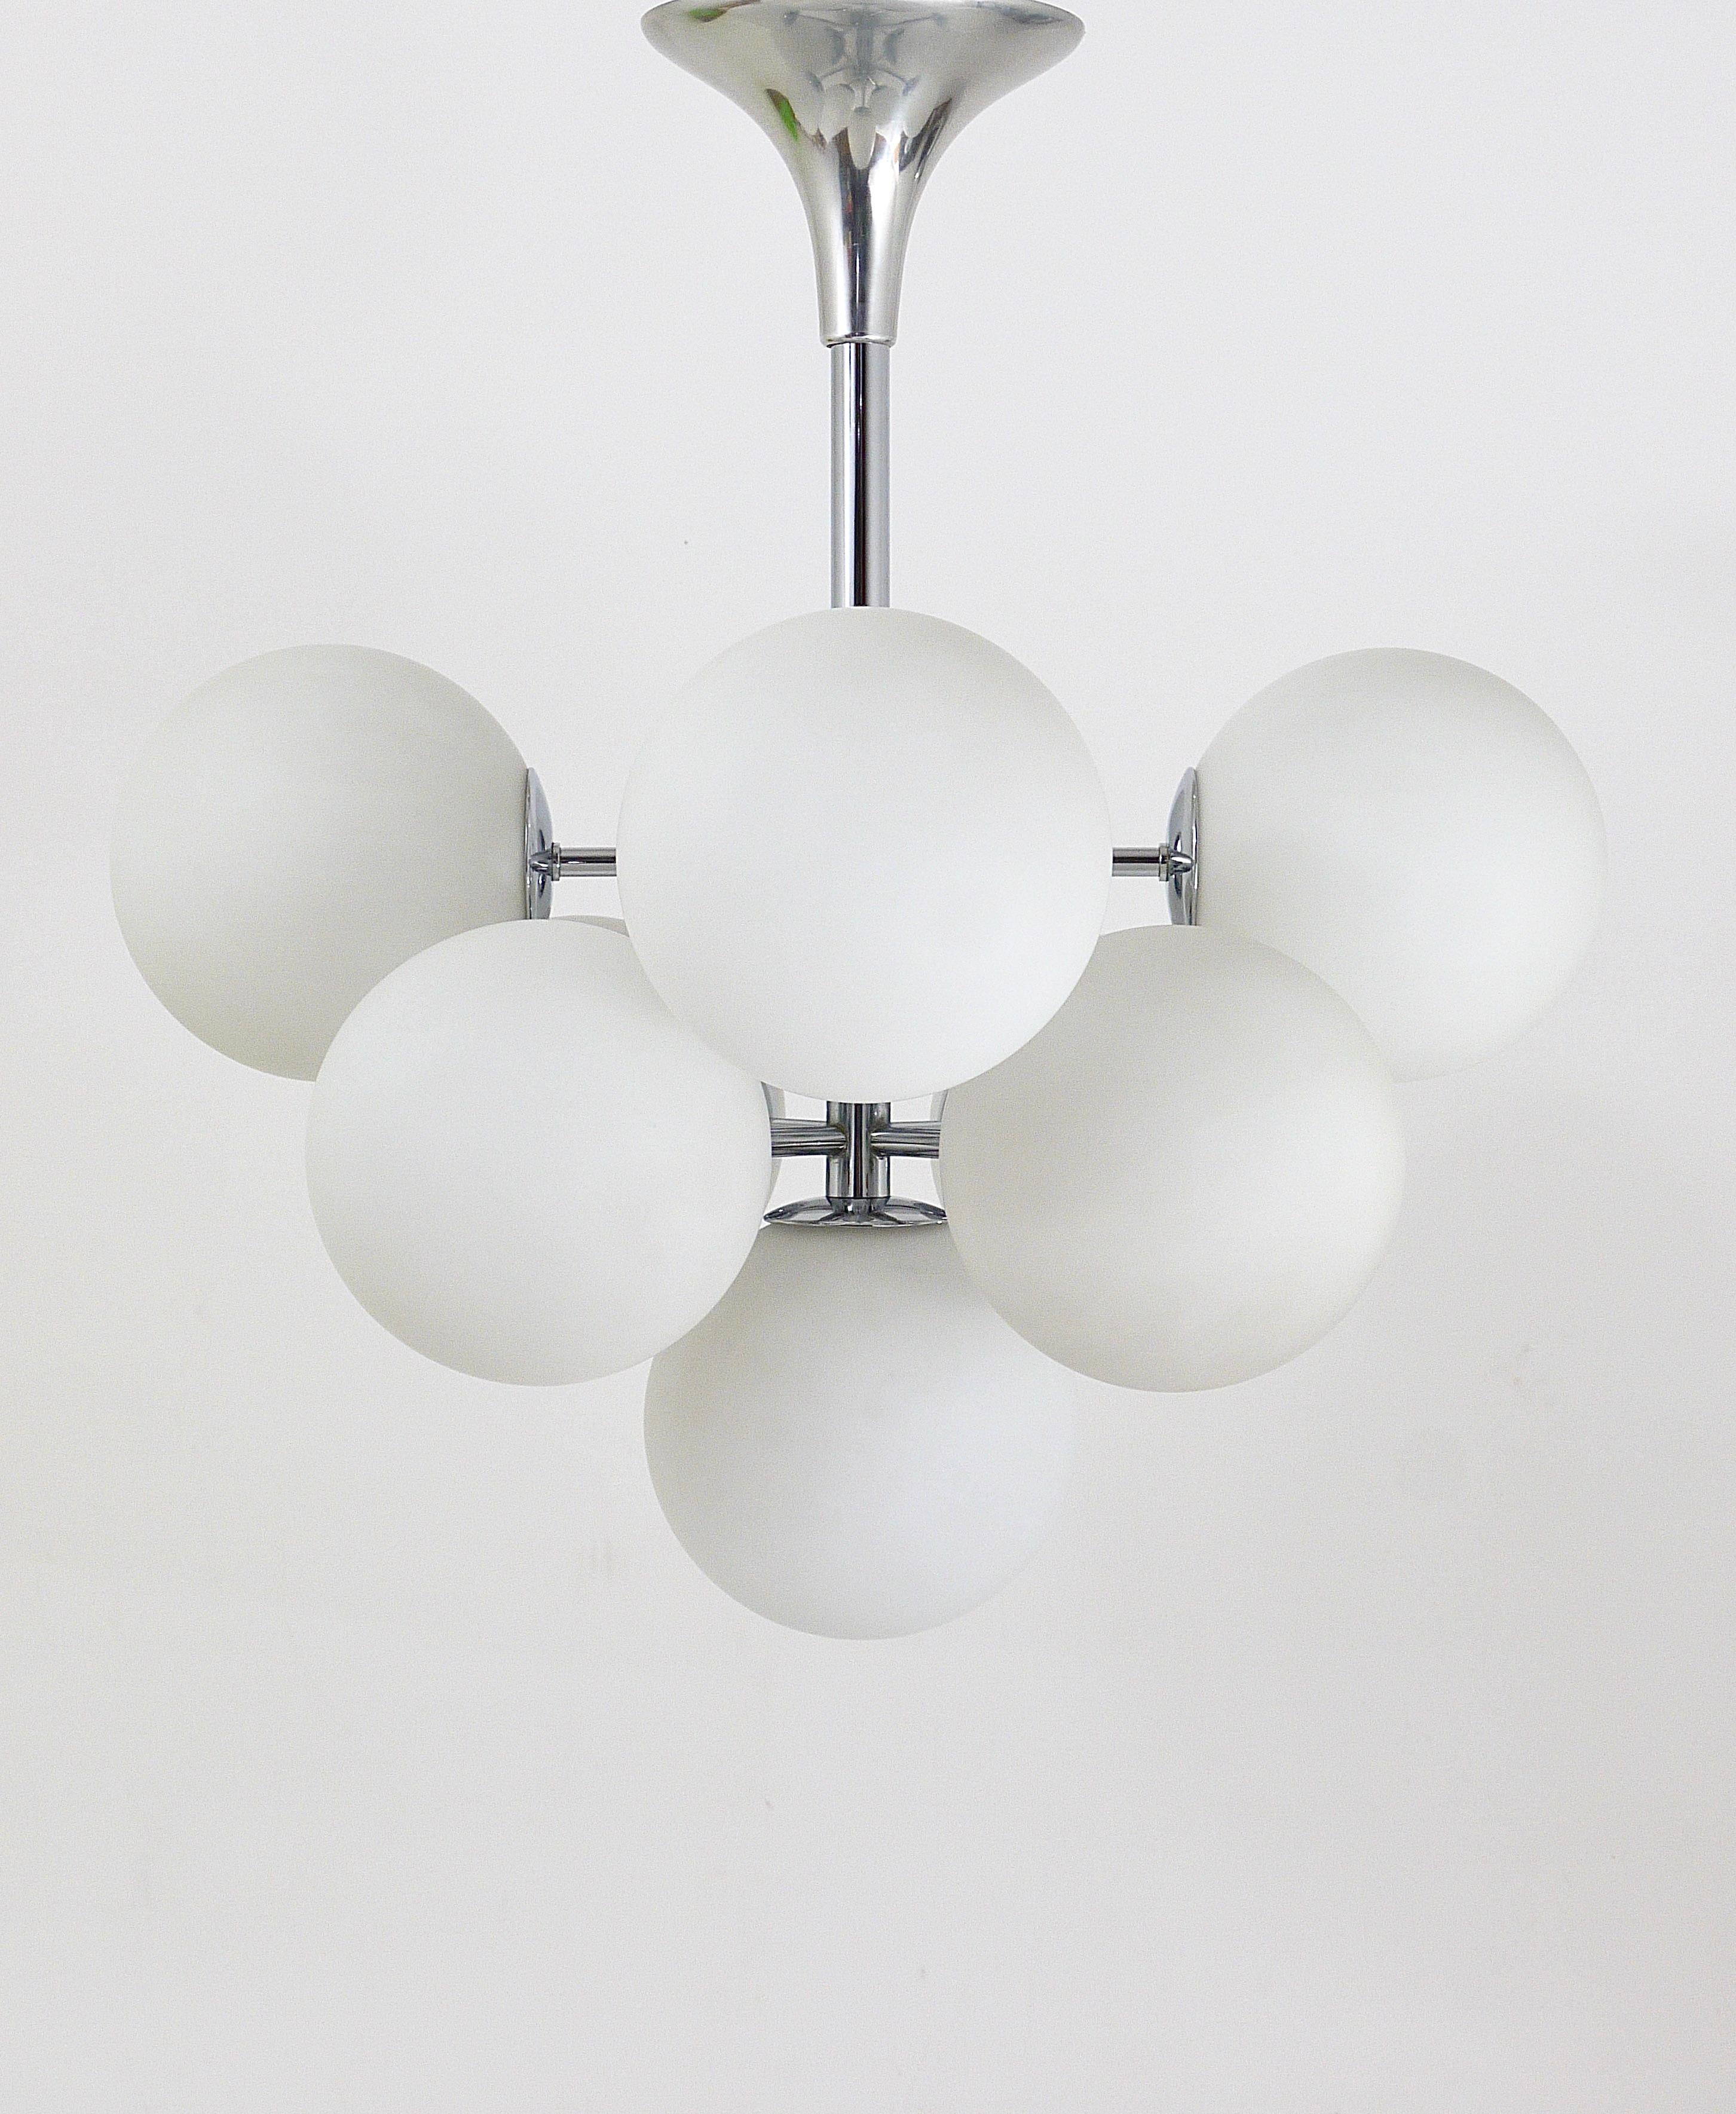 A stylish 1960s Space Age atomic Sputnik-style chandelier. Executed by Temde Switzerland. Chrome-plated hardware with a tulip canopy and nine white frosted hand blown glass globe shades. In very good condition. Labelled on the canopy.

 